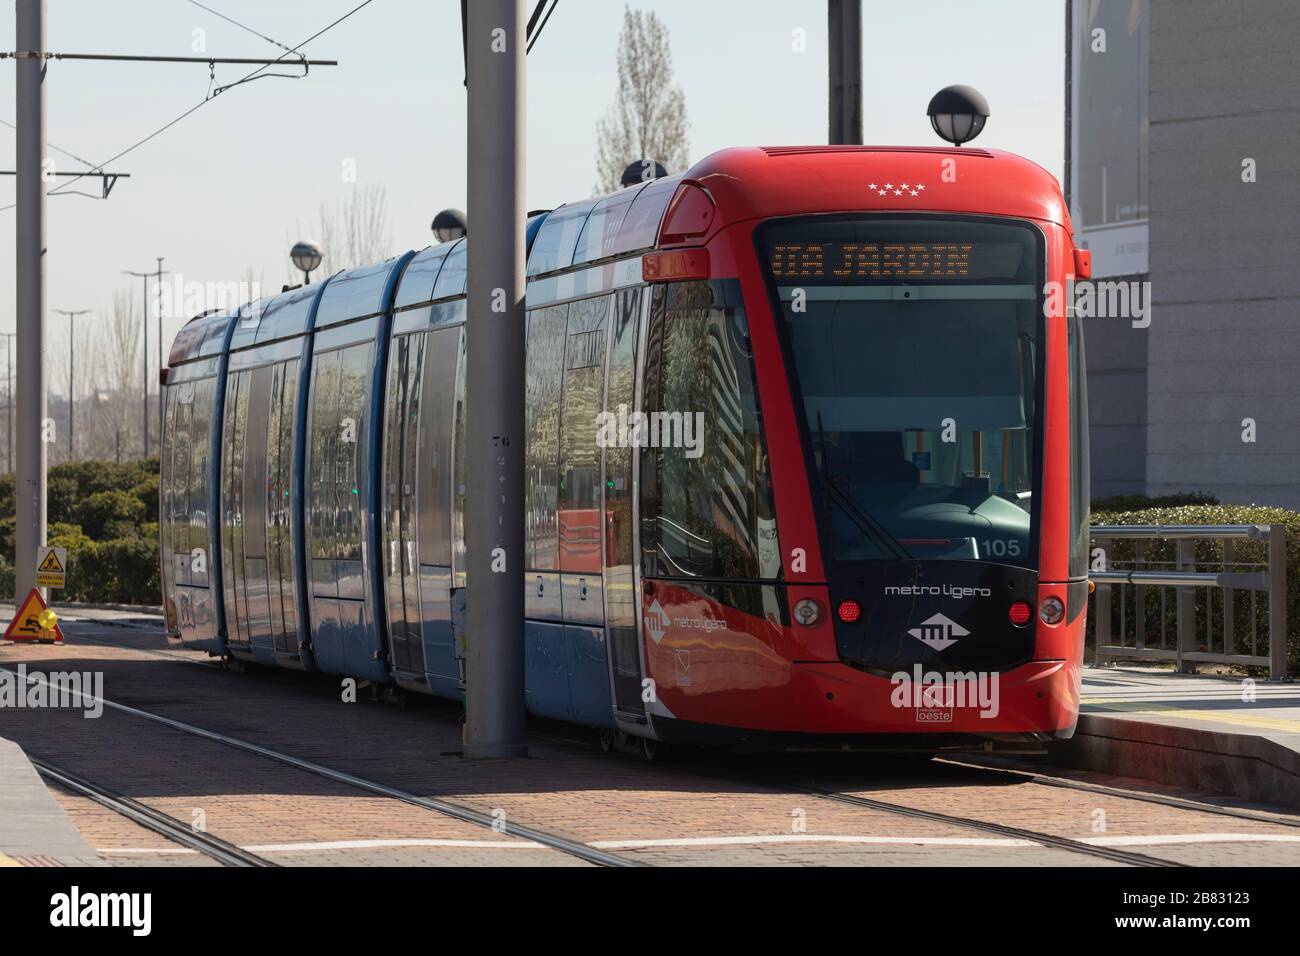 Madrid, Spain March 2020: Train of the Metro Ligero Oeste of Madrid public transport service, operating as it passes through the Ciudad del Cine Stock Photo - Alamy